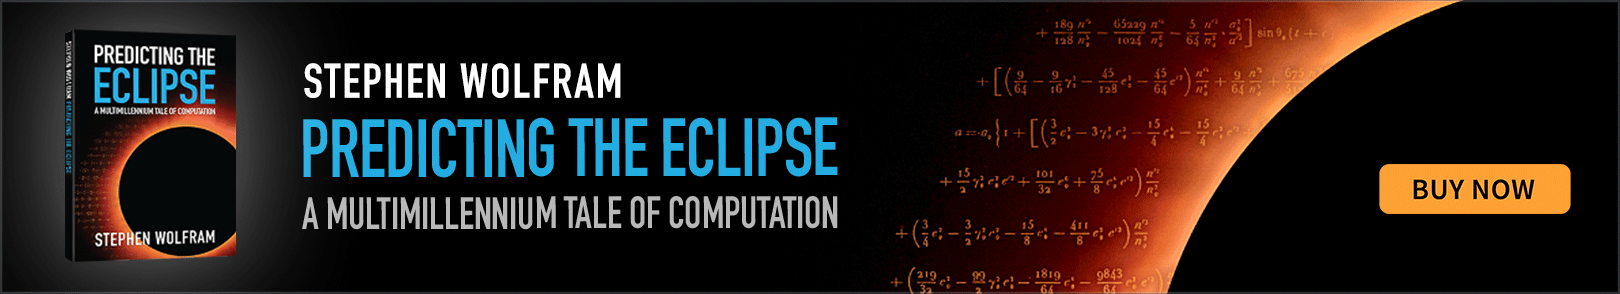 Predicting the Eclipse: A Multimillennium Tale of Computation. A book by Stephen Wolfram.